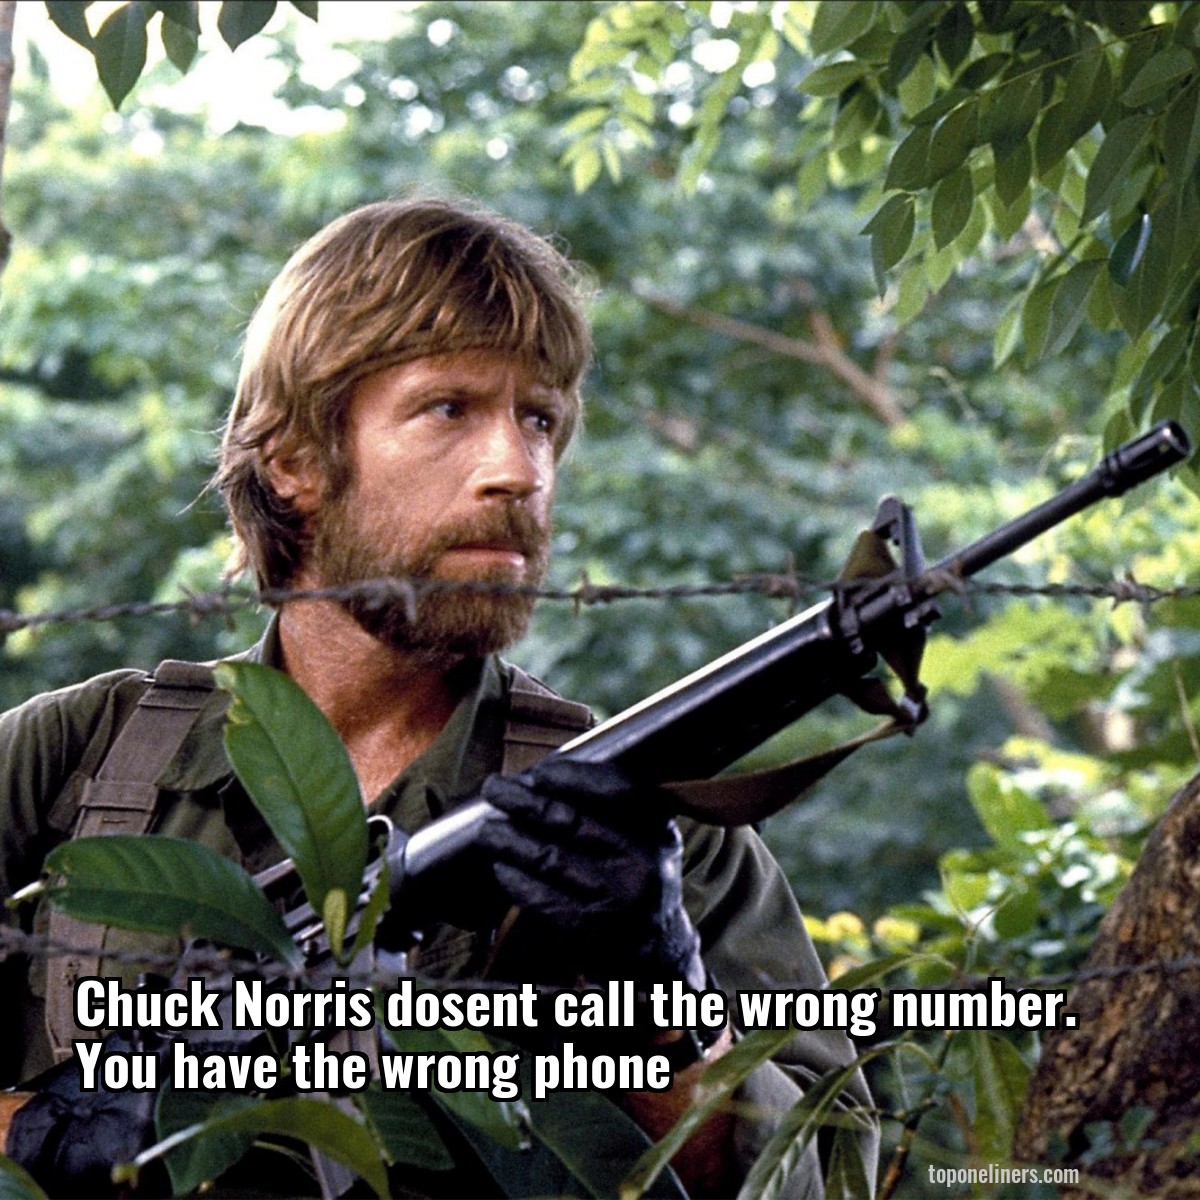 Chuck Norris dosent call the wrong number. You have the wrong phone